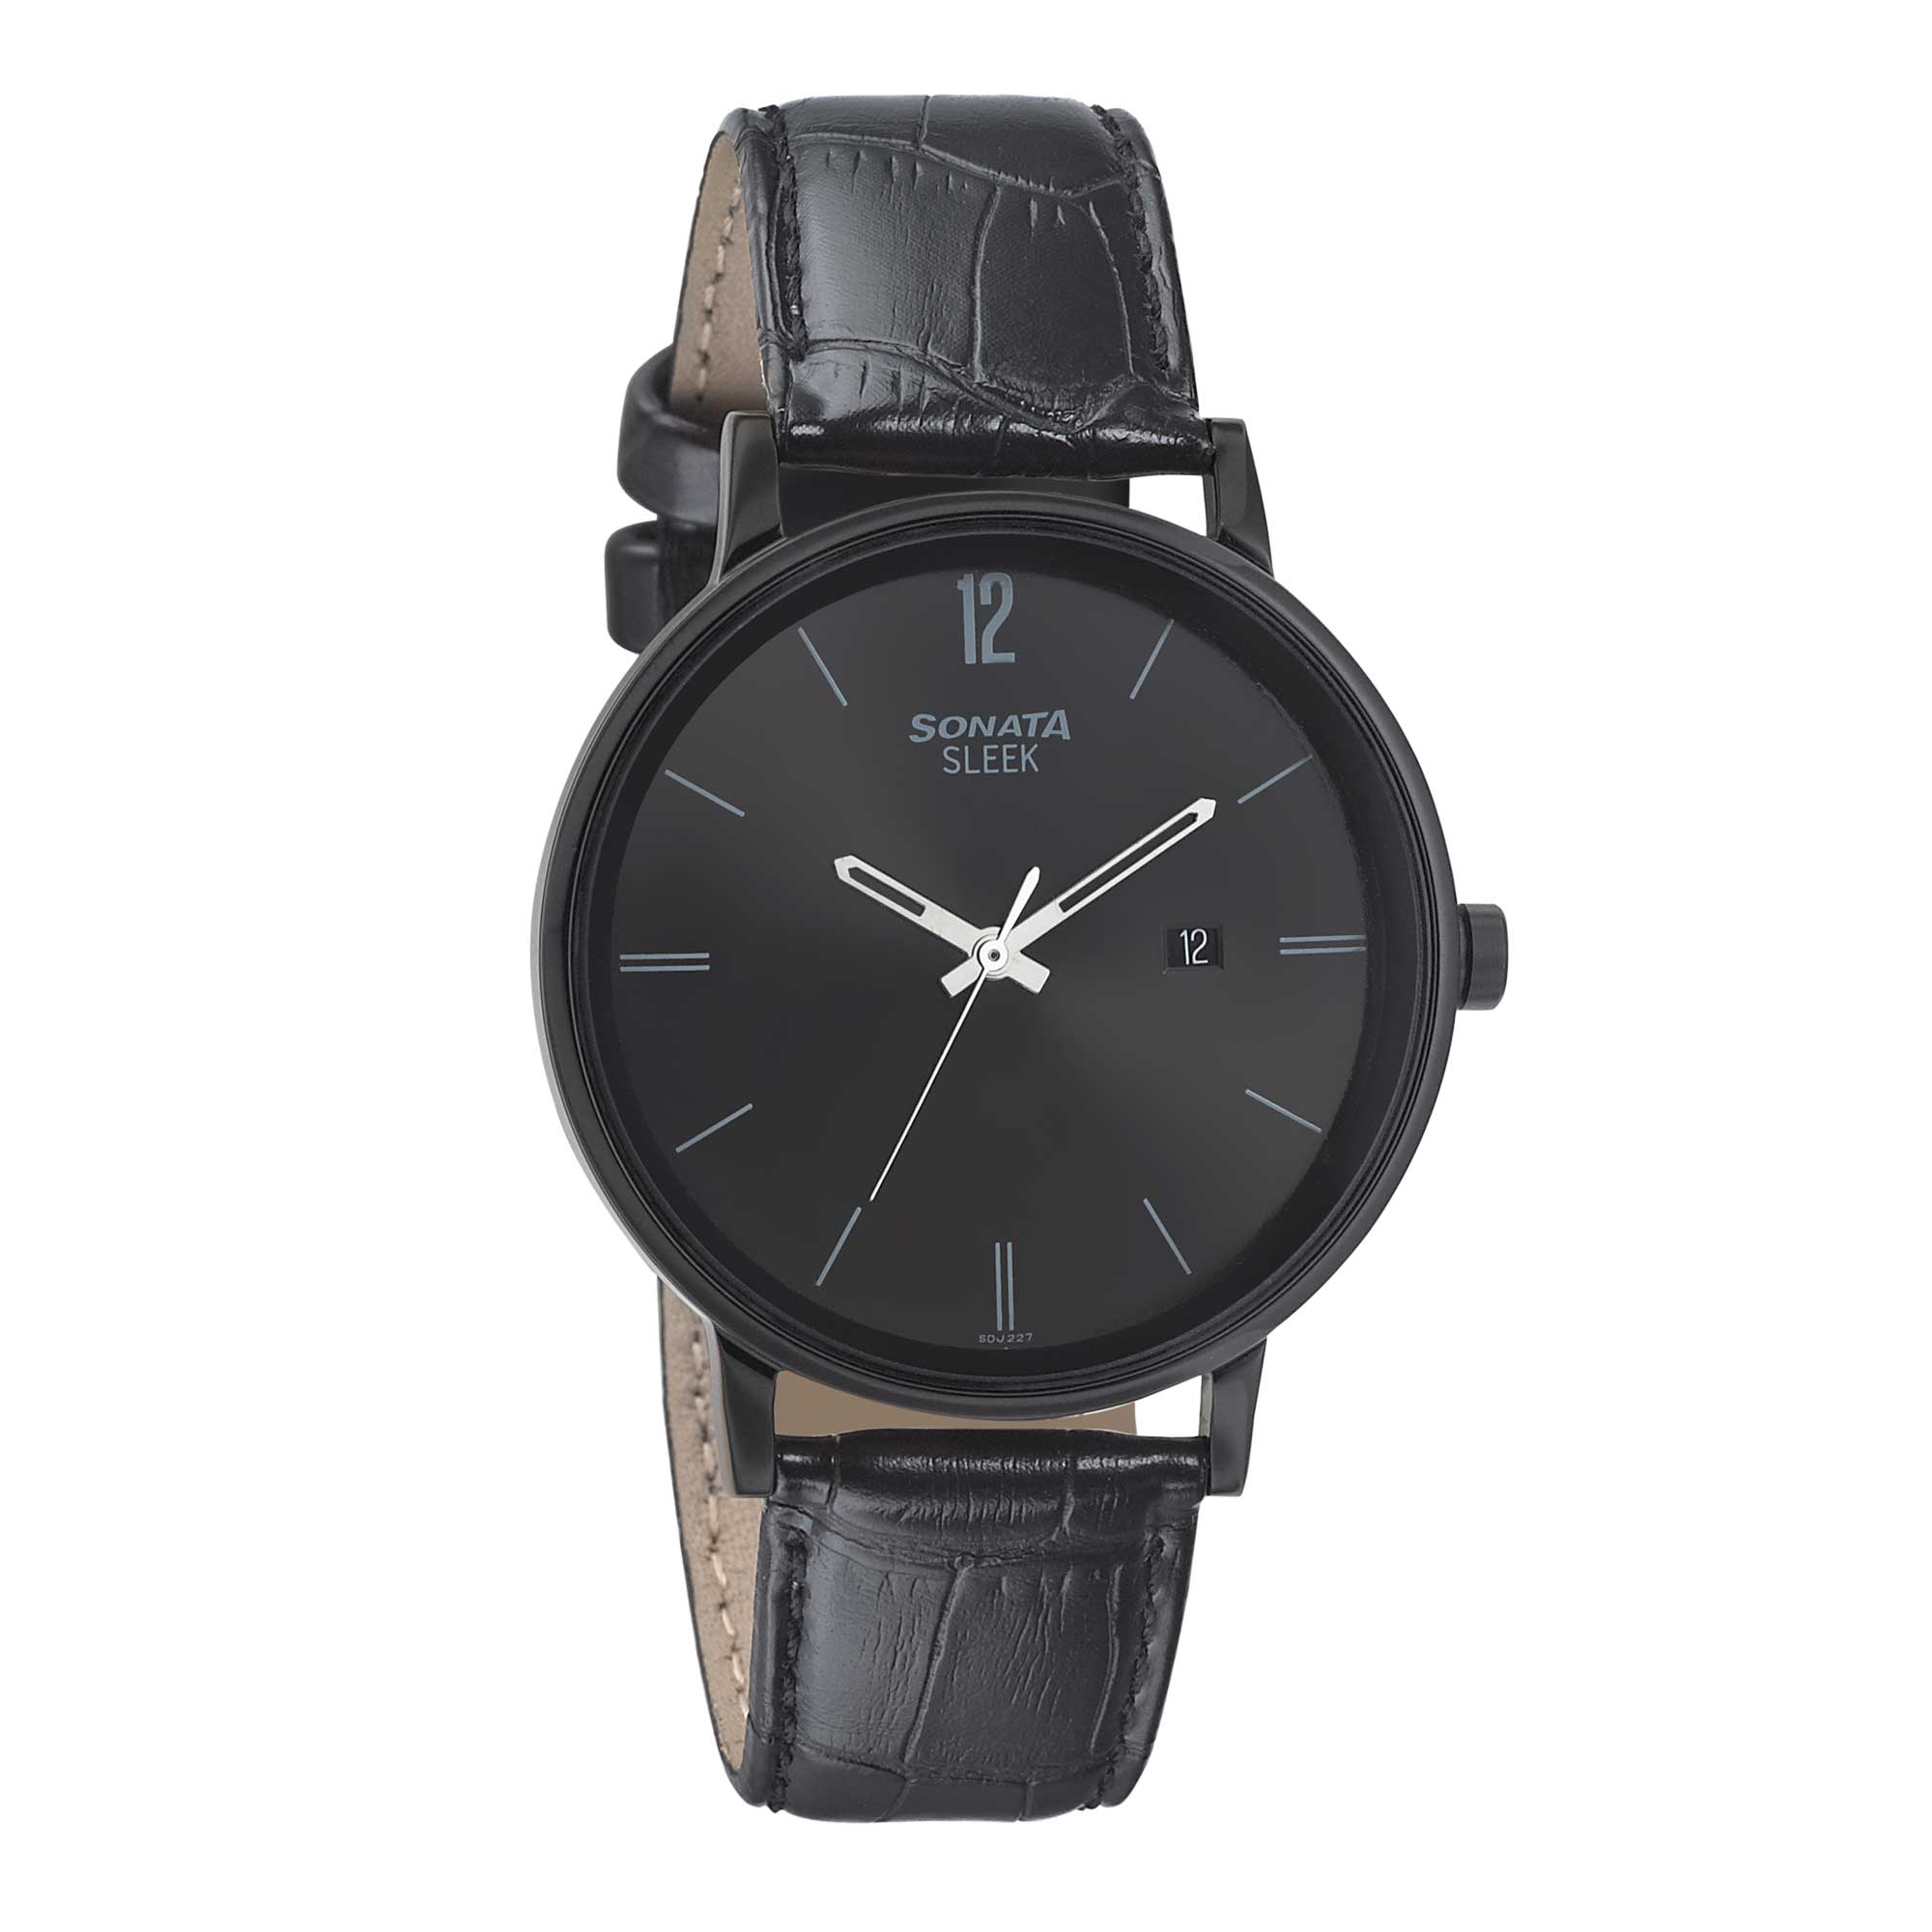 Sonata Quartz Analog with Date Black Dial Leather Strap Watch for Men